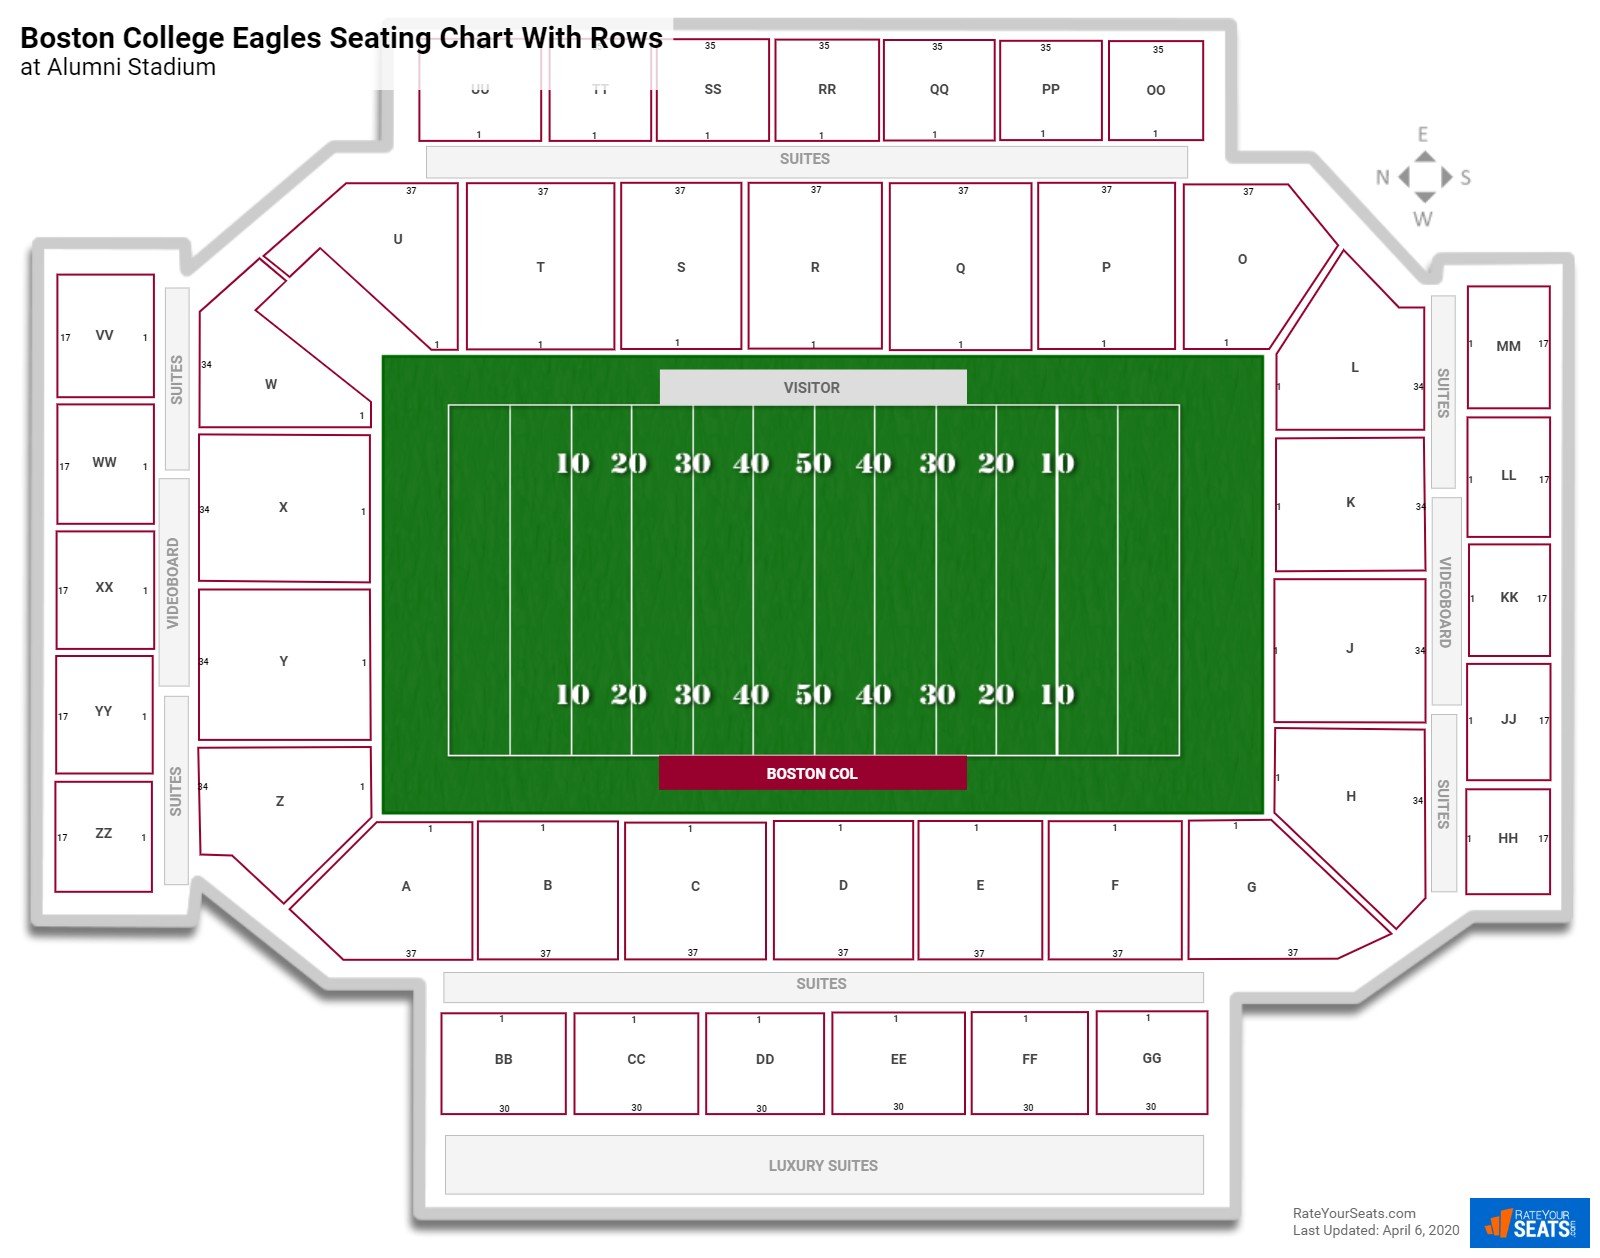 Alumni Stadium seating chart with row numbers